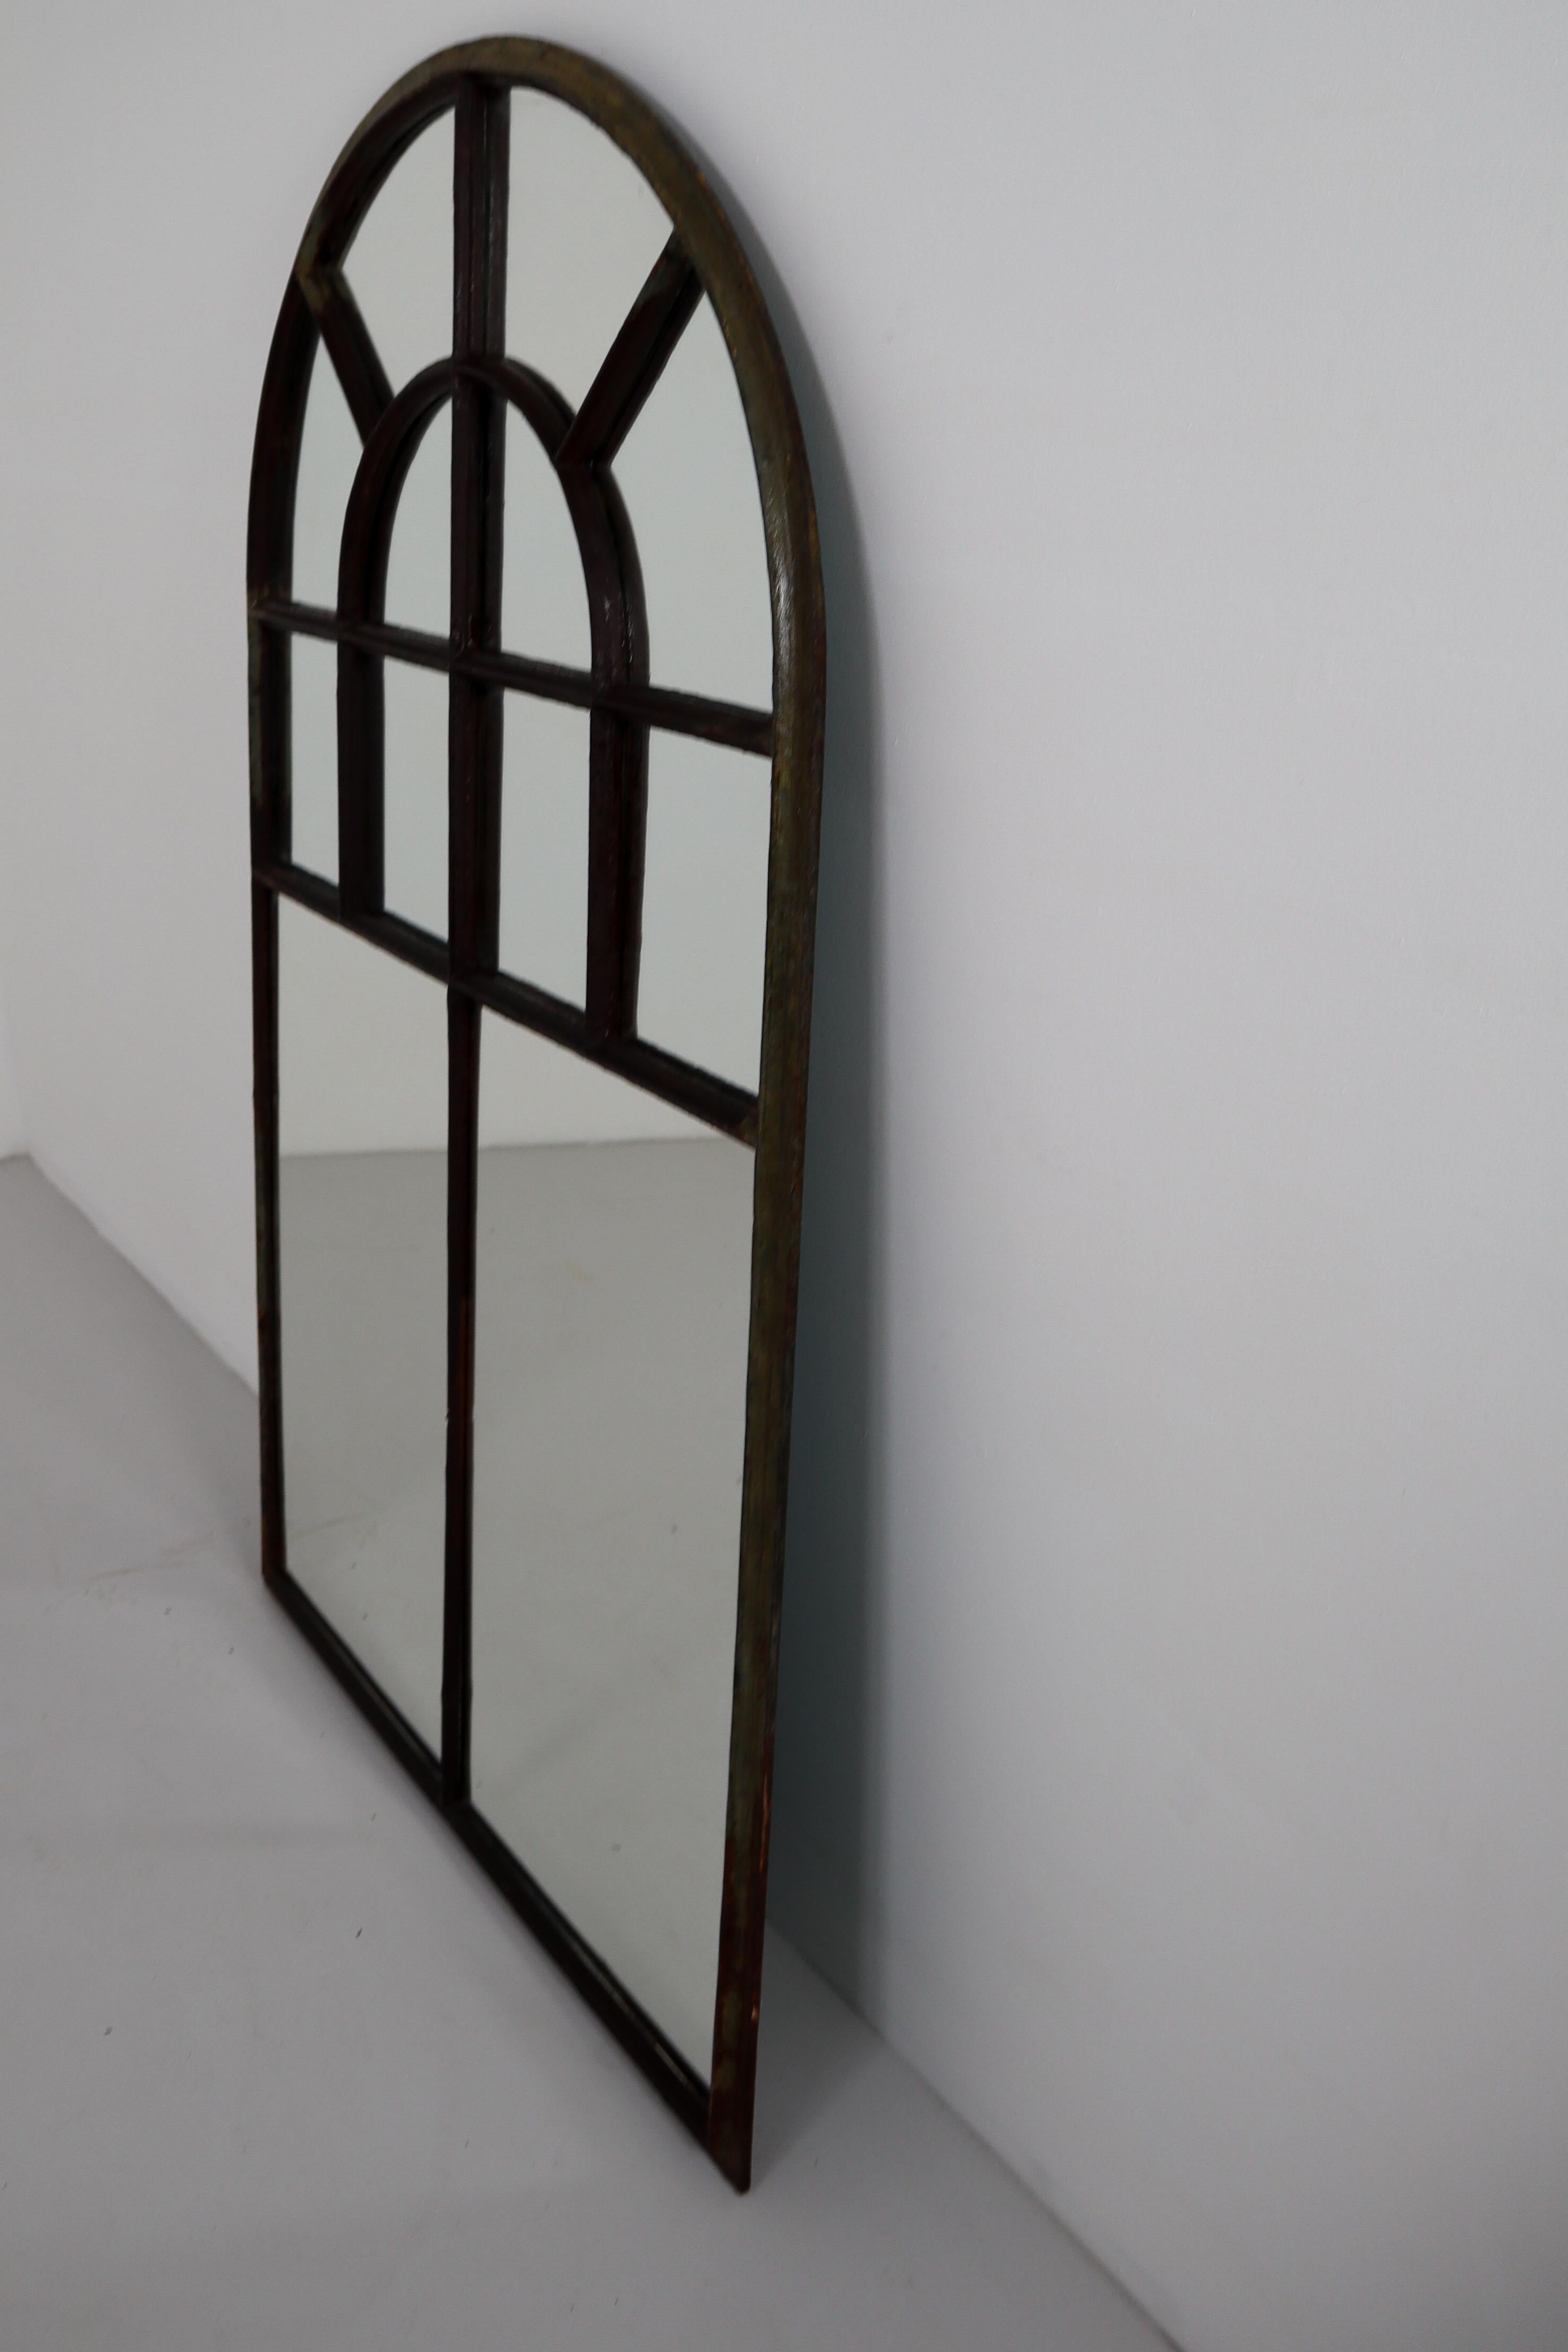 French Provincial Large Simple Cast Iron Arched Industrial Window with Mirror, France, 1800s